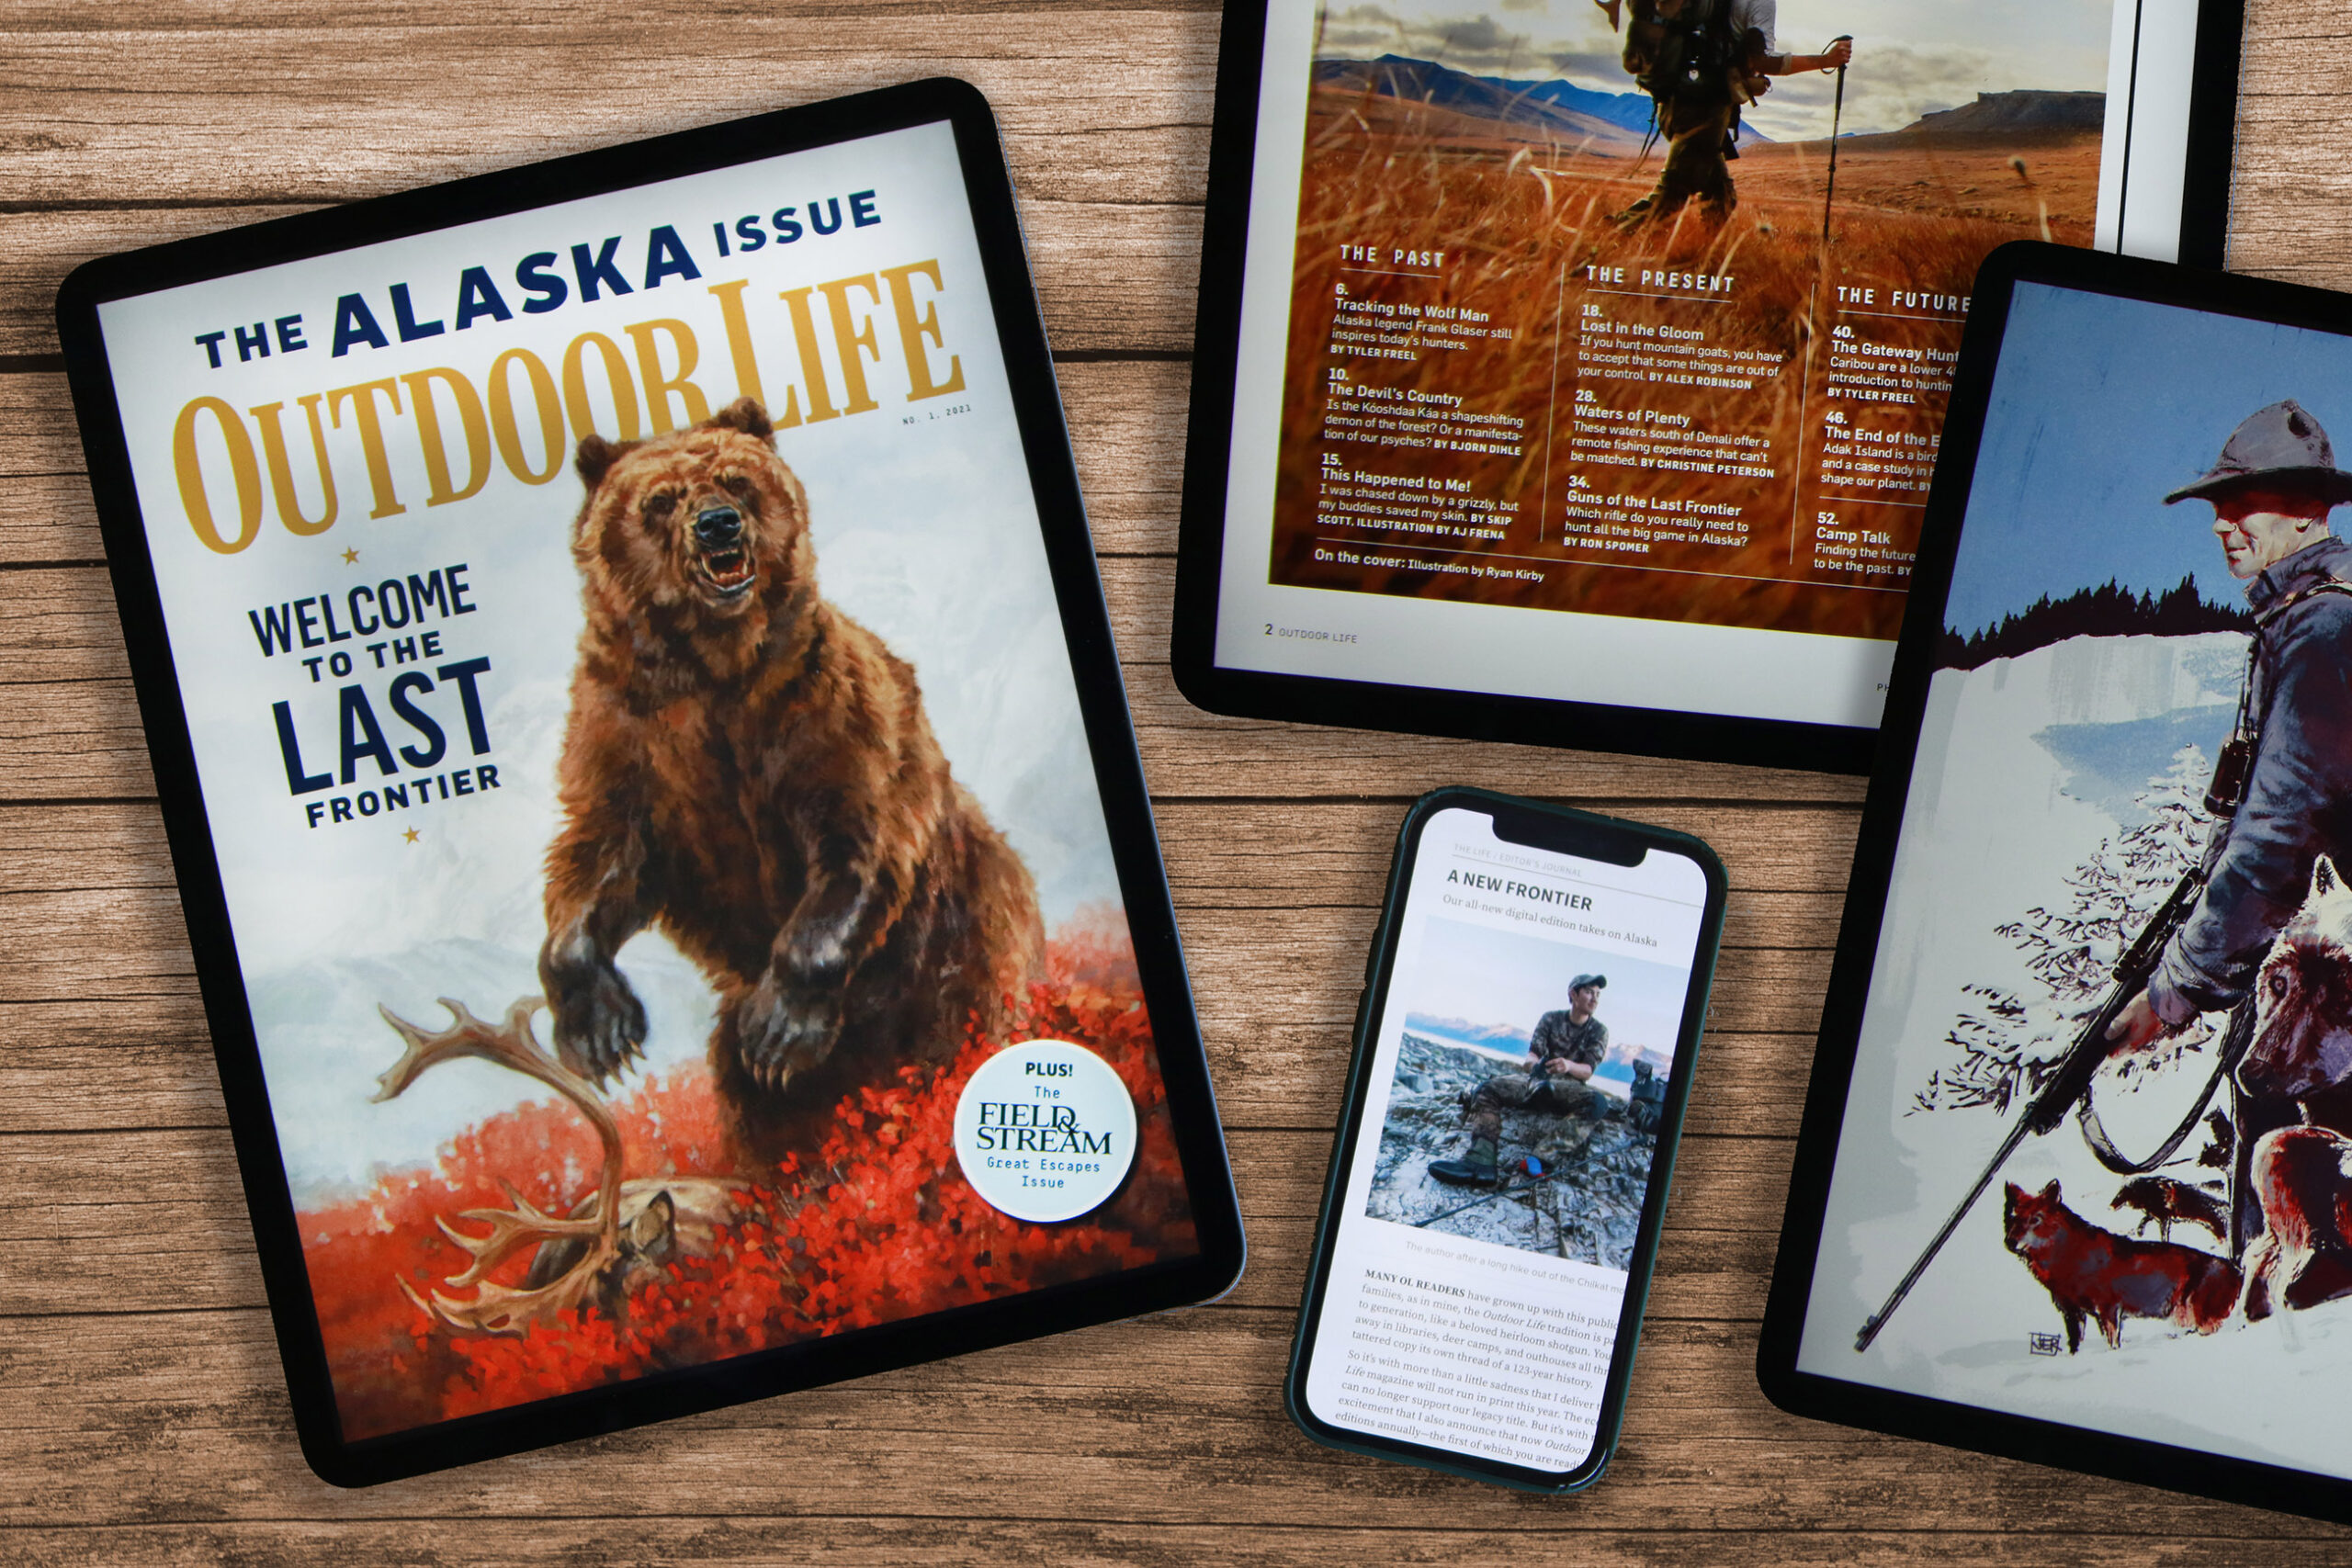 The Outdoor Life digital edition